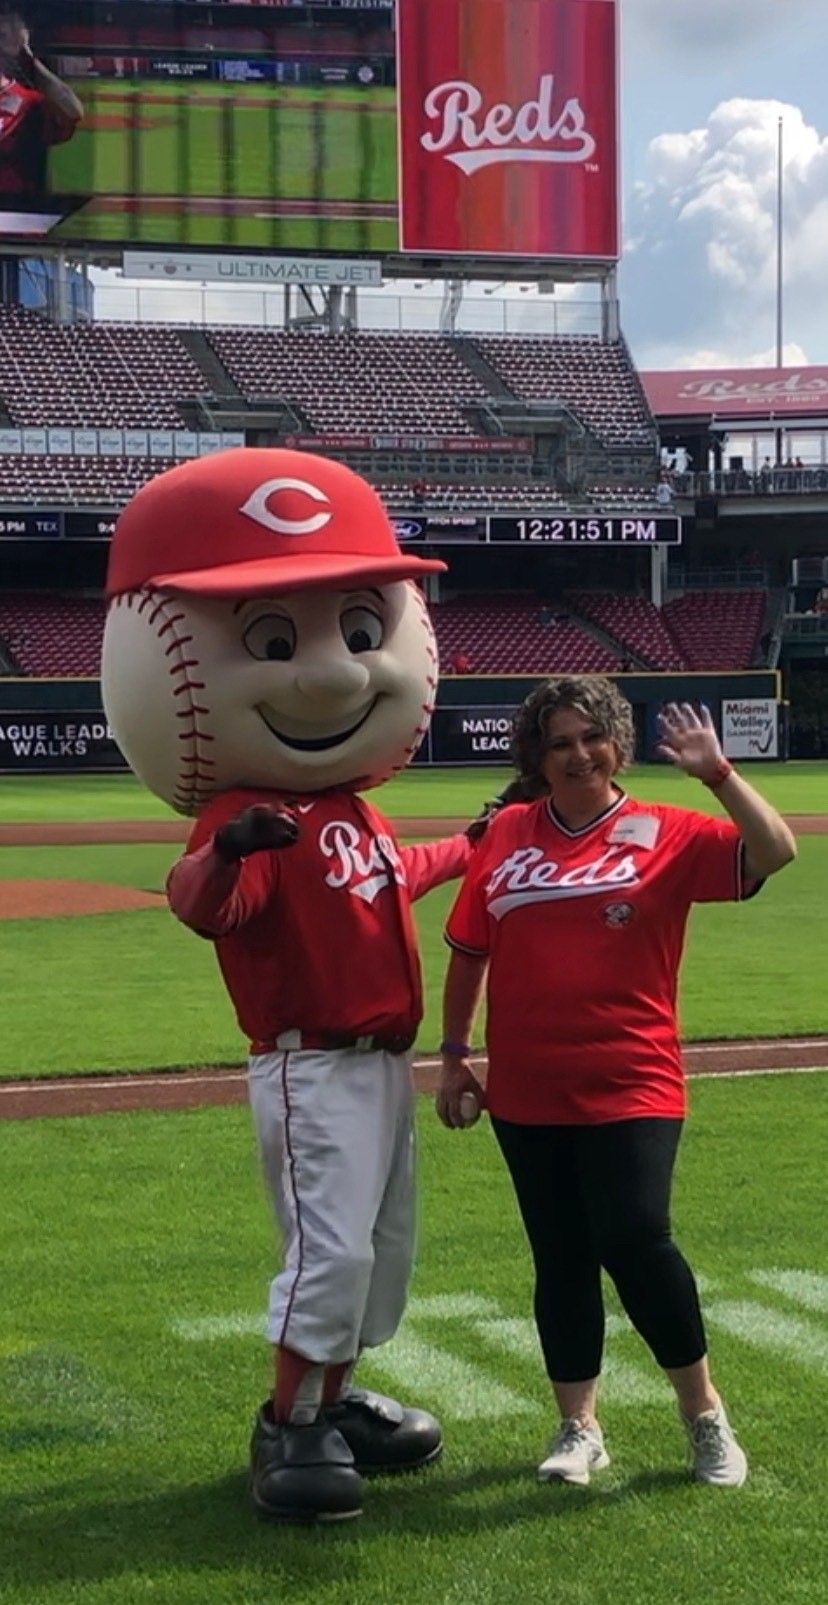 Reds fan poses with mascot